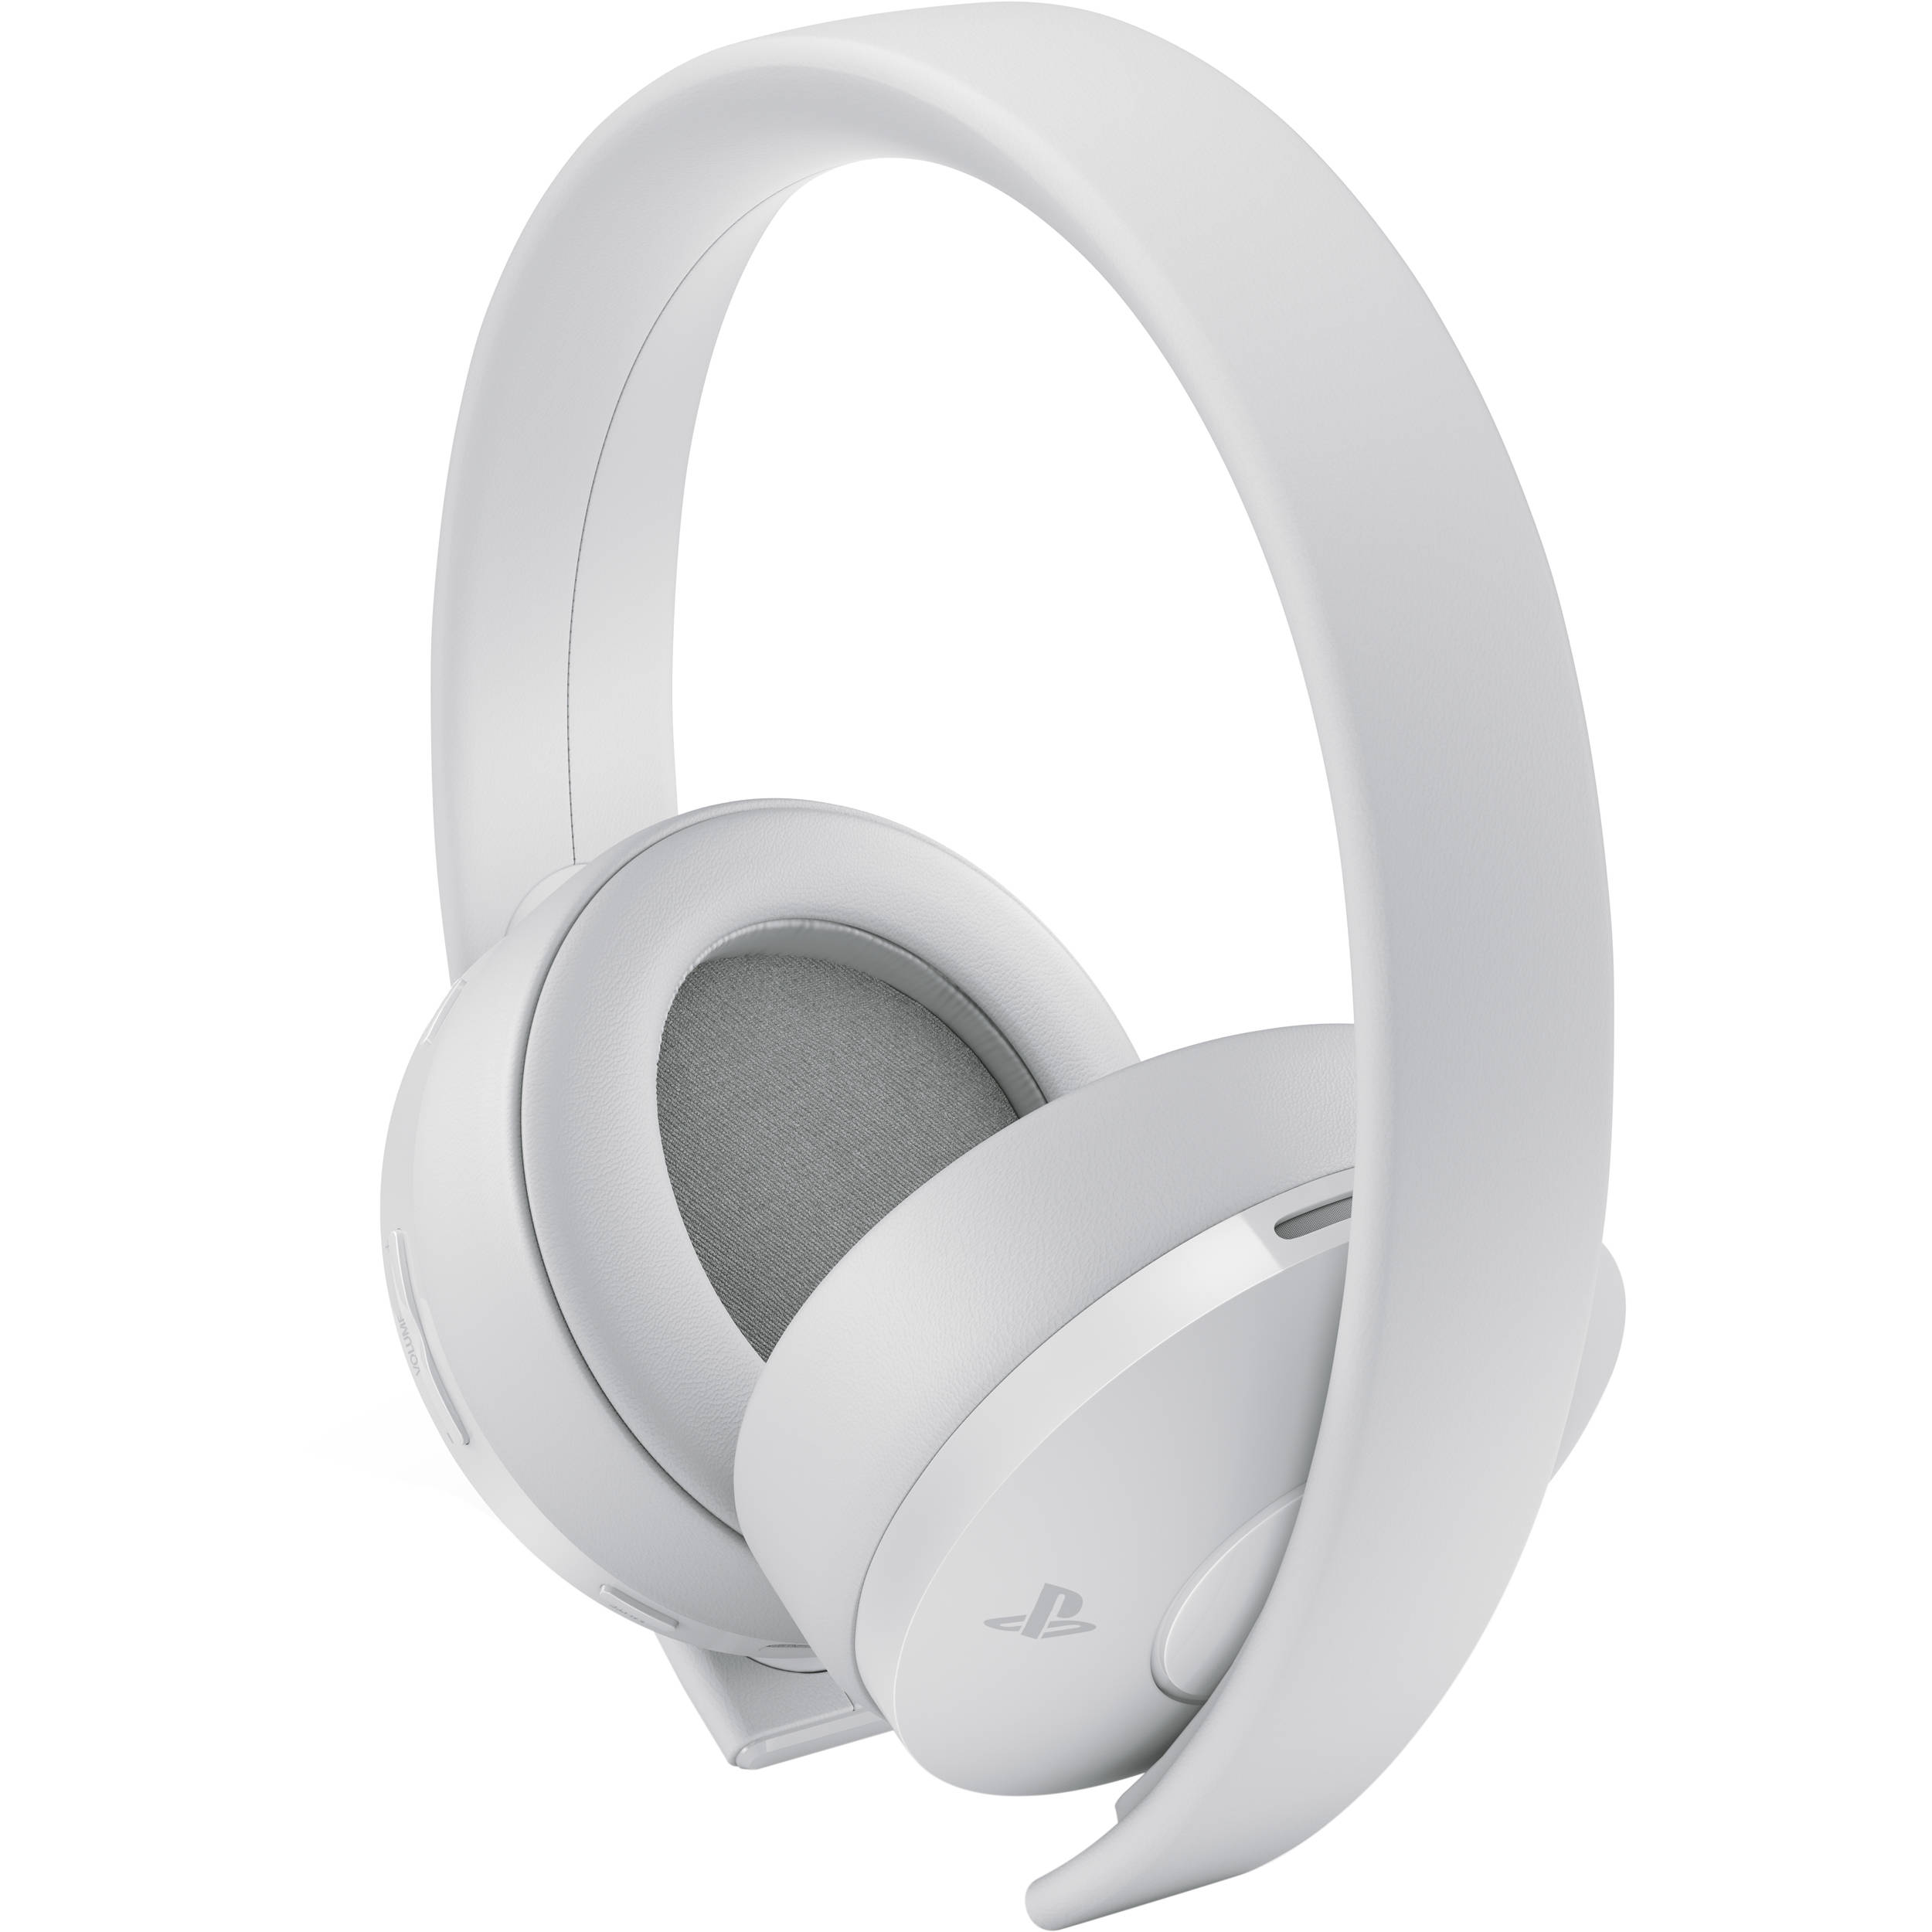 playstation gold white headset